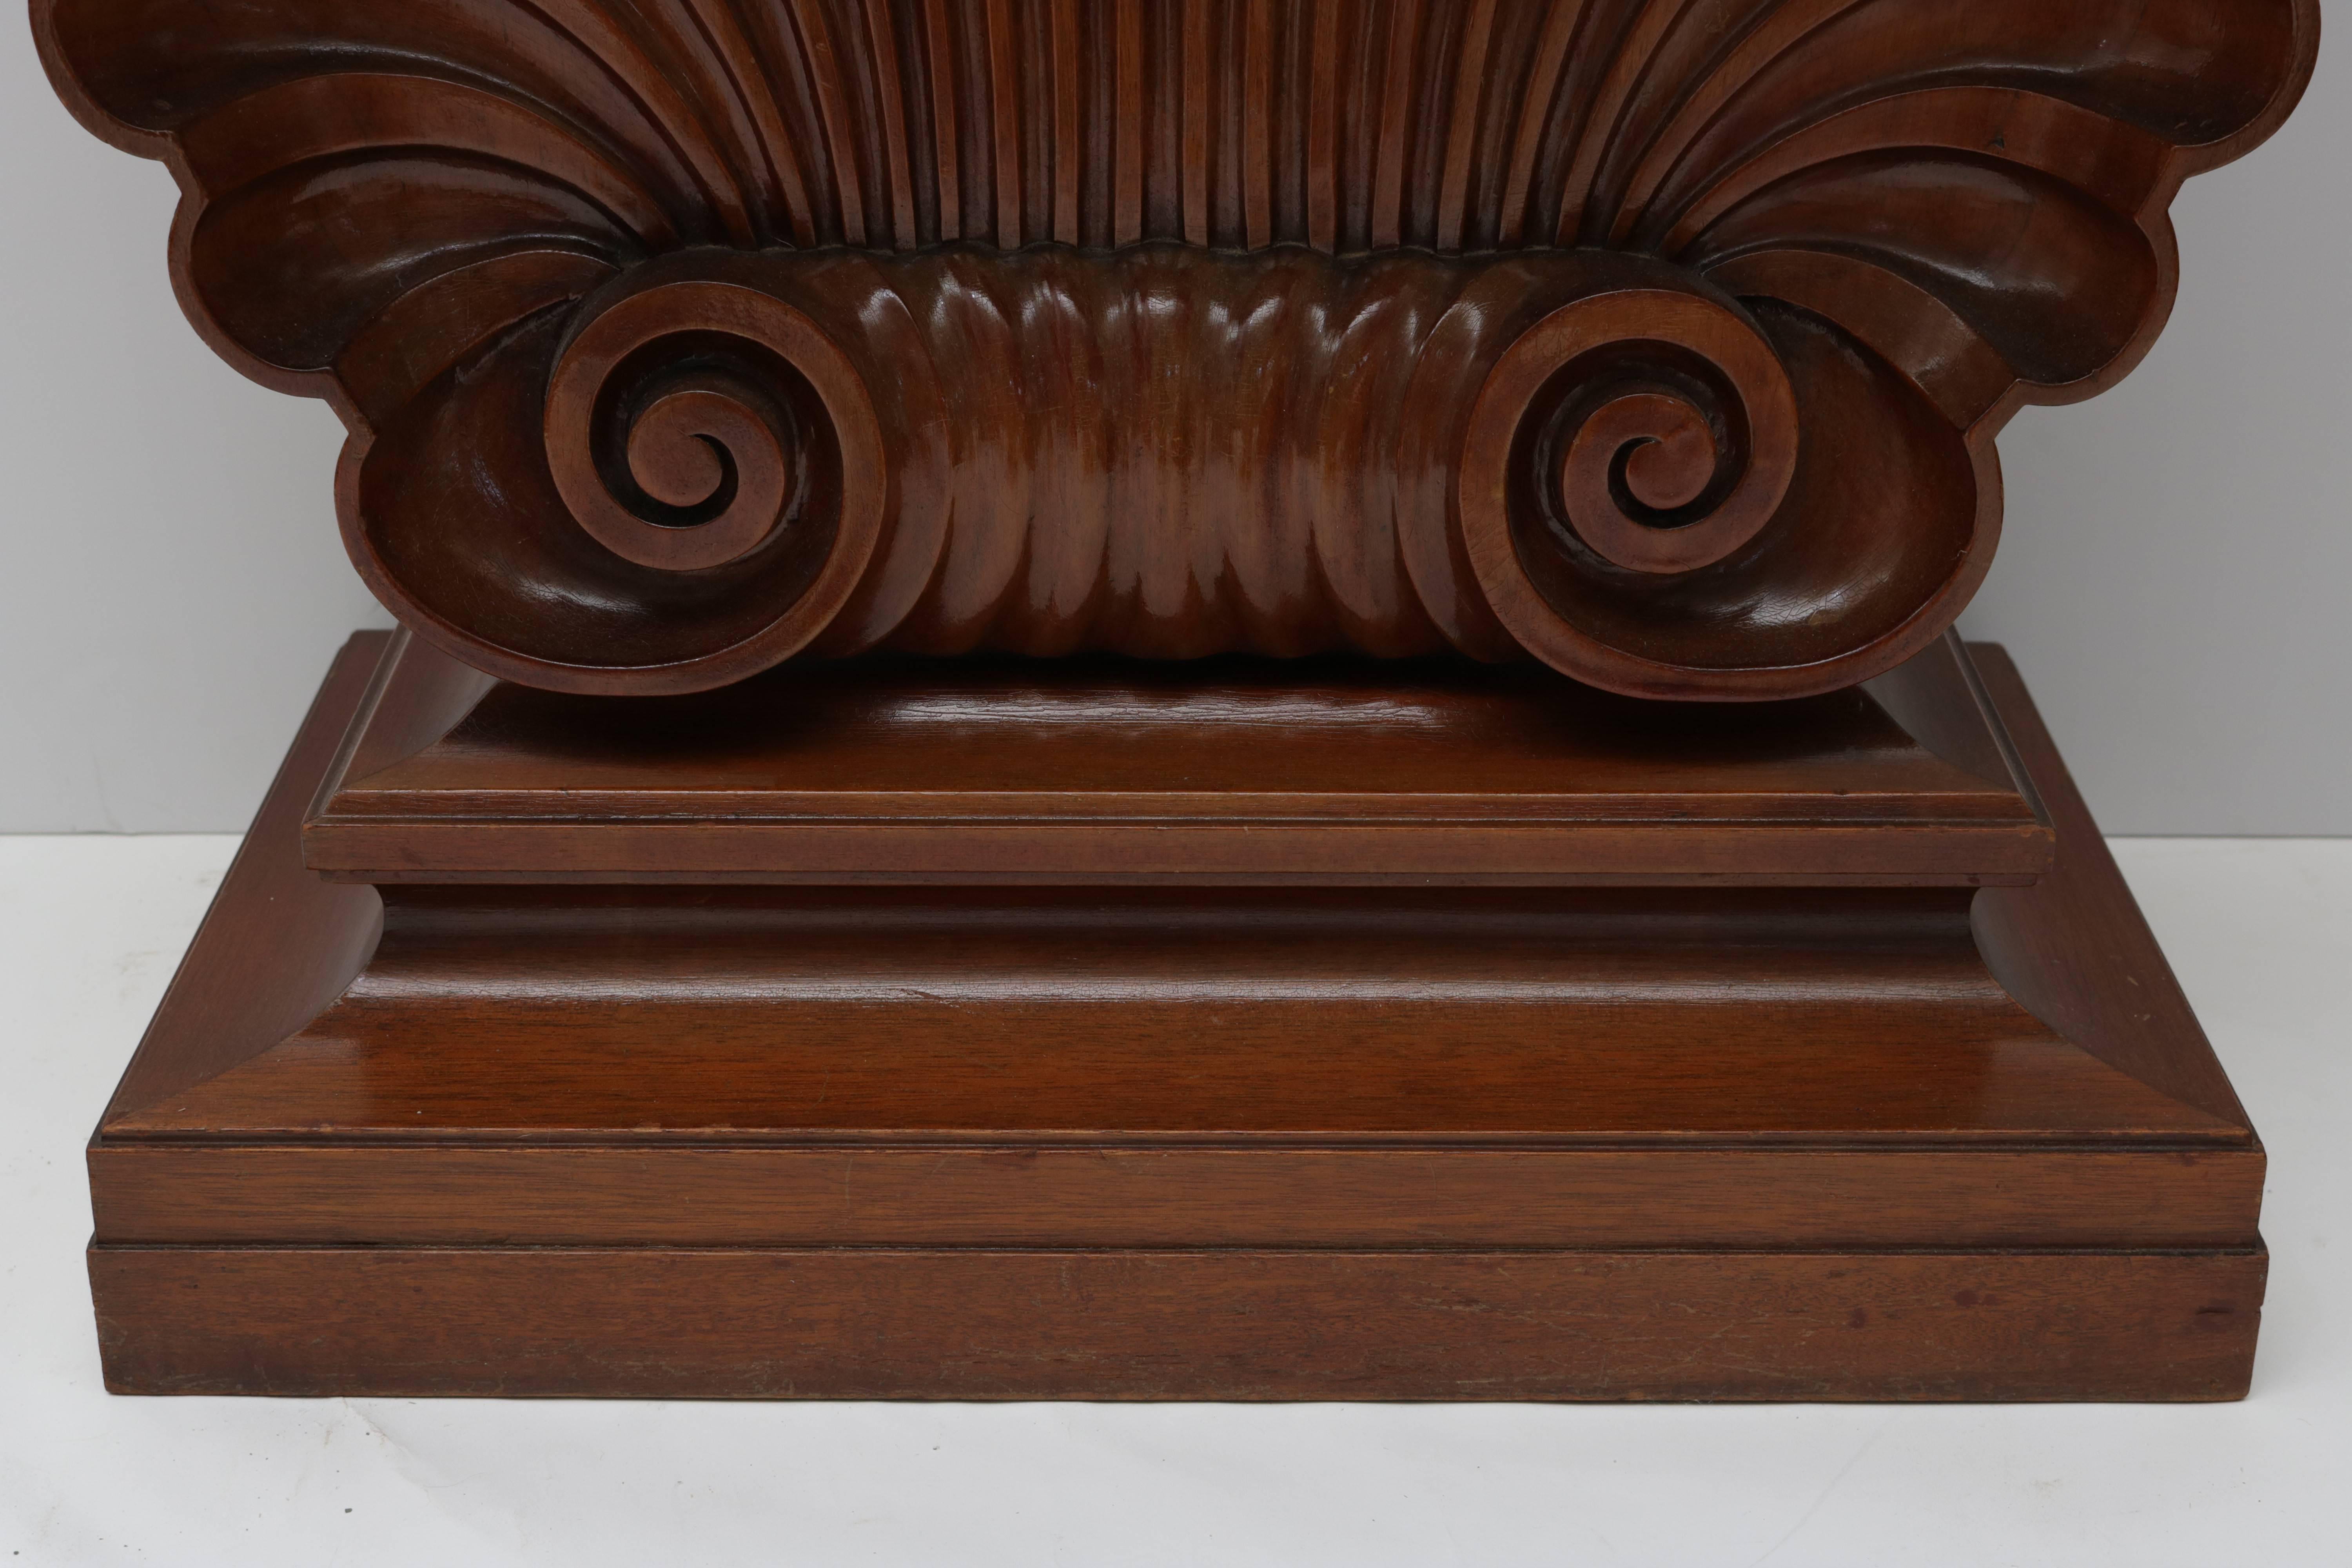 Regency Revival Shell Motif Mahogany Console Table by Edward Wormley for Dunbar Furniture